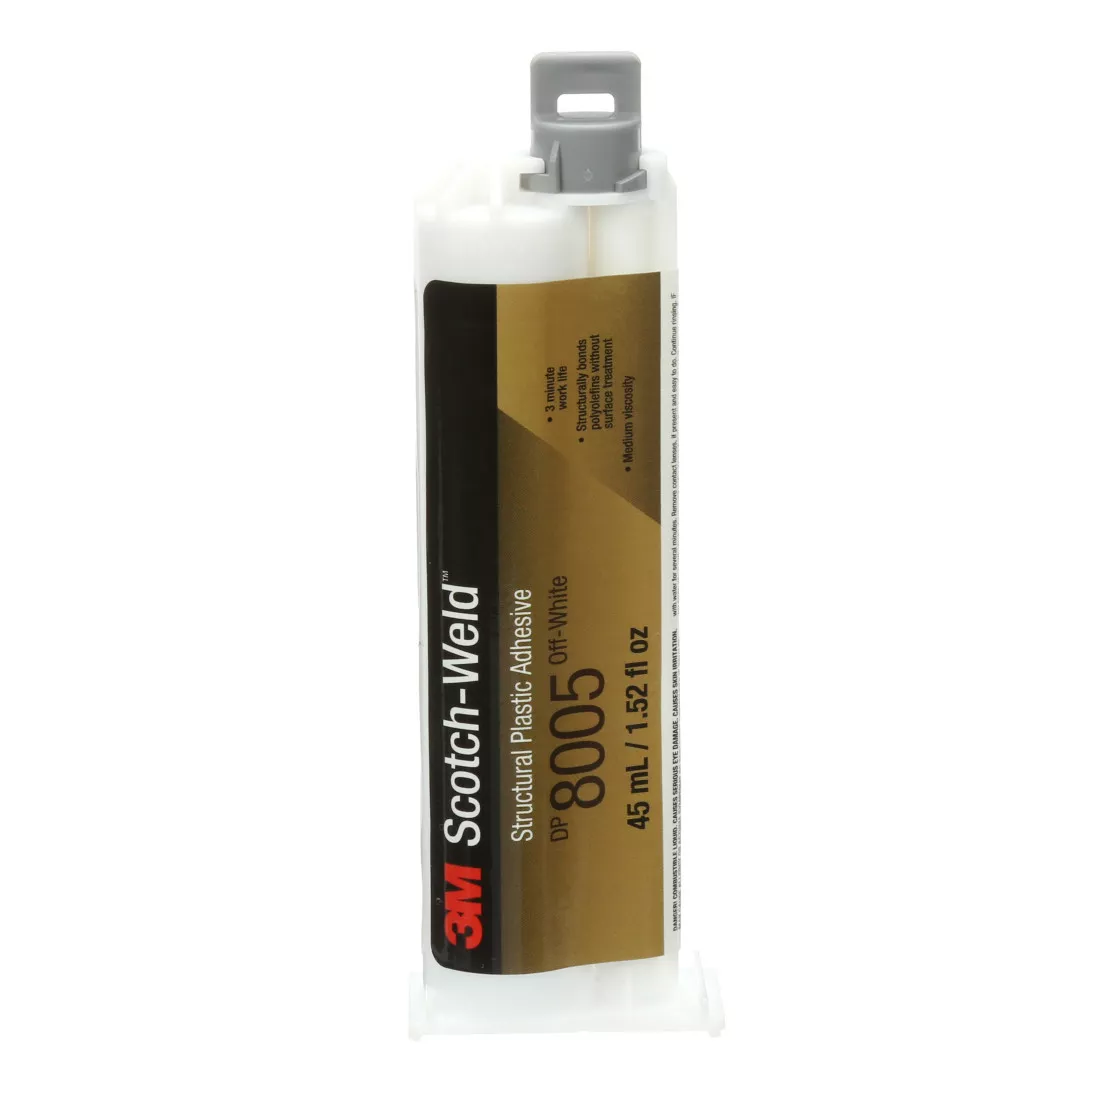 3M™ Scotch-Weld™ Structural Plastic Adhesive DP8005, Off-White, 45 mL Duo-Pak, 12 Each/Case